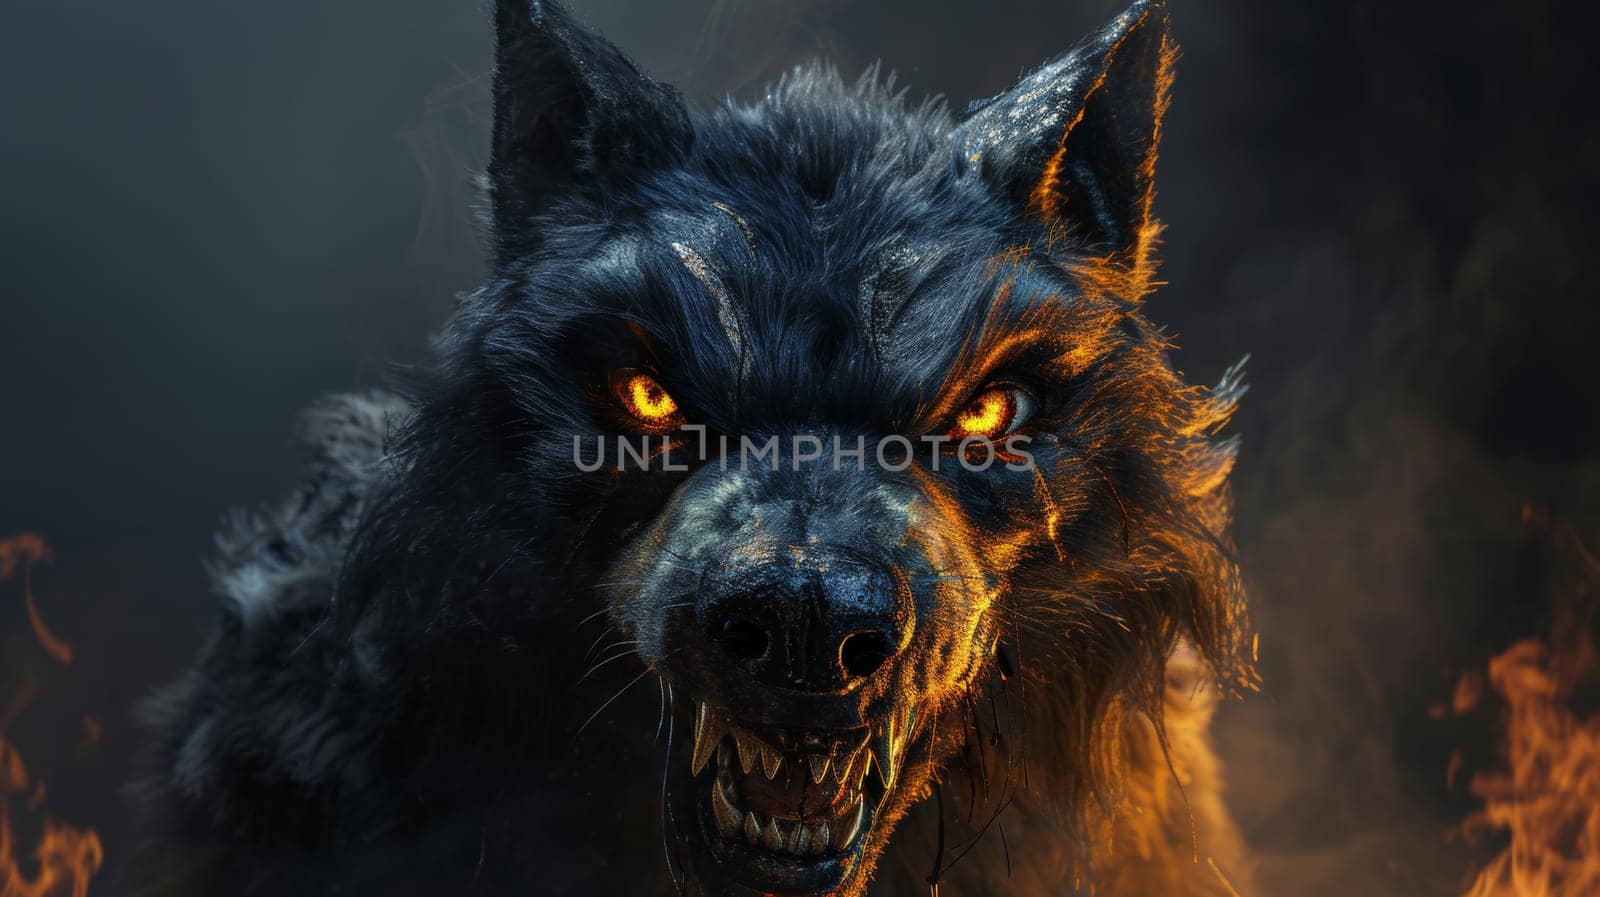 A close up of a wolf with glowing eyes in the dark